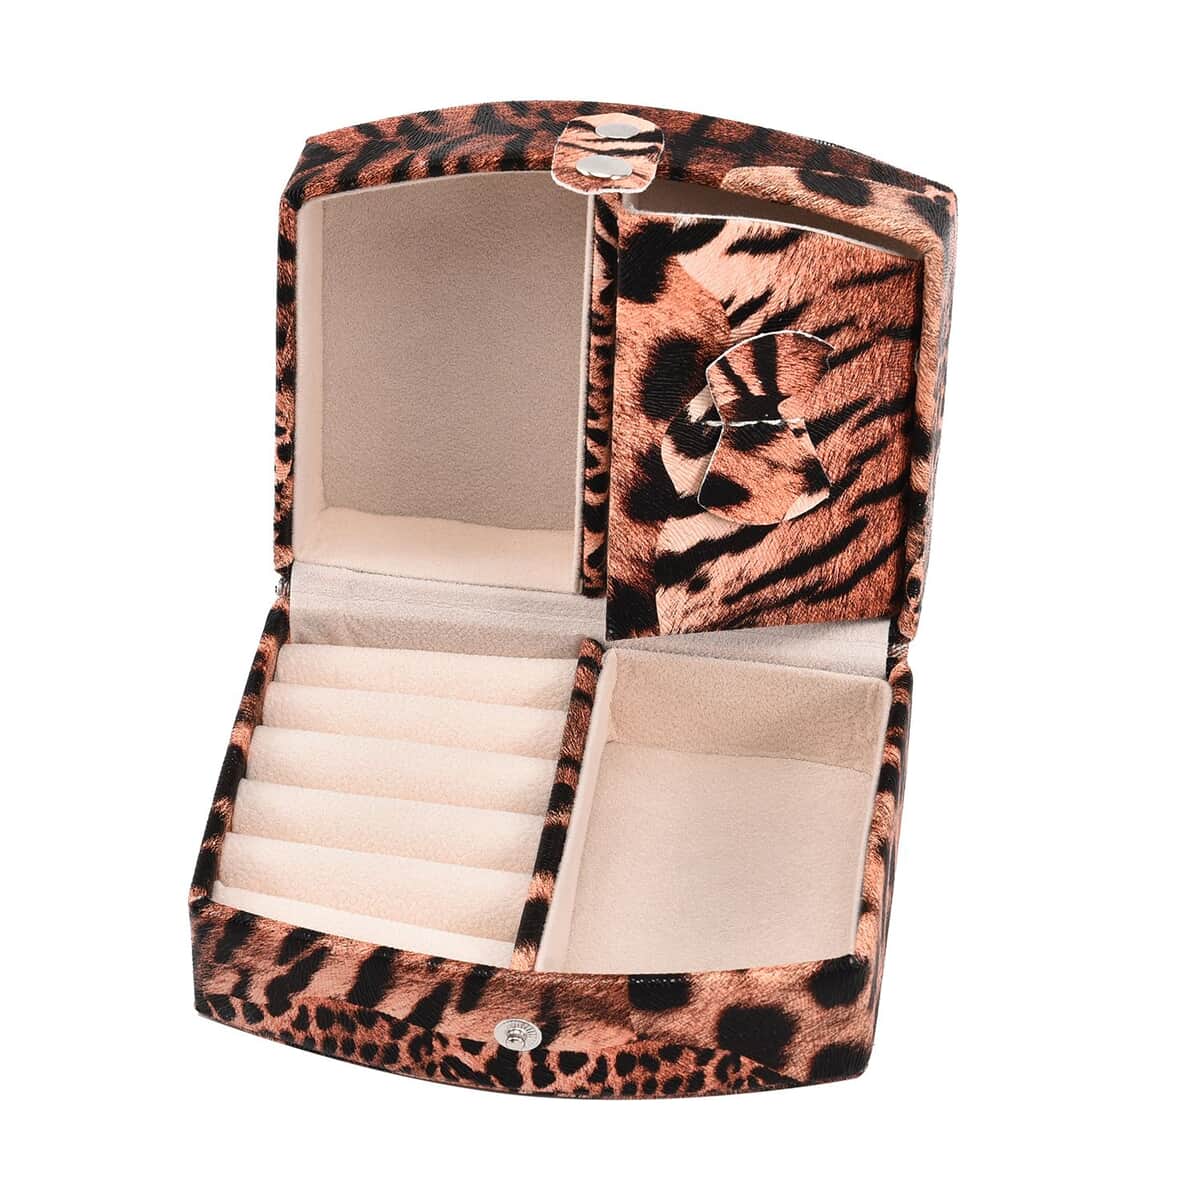 Brown Leopard Pattern Faux Leather Small Travel Jewelry Box with Button Clasp (4.6"x3.5"x2.4") image number 4